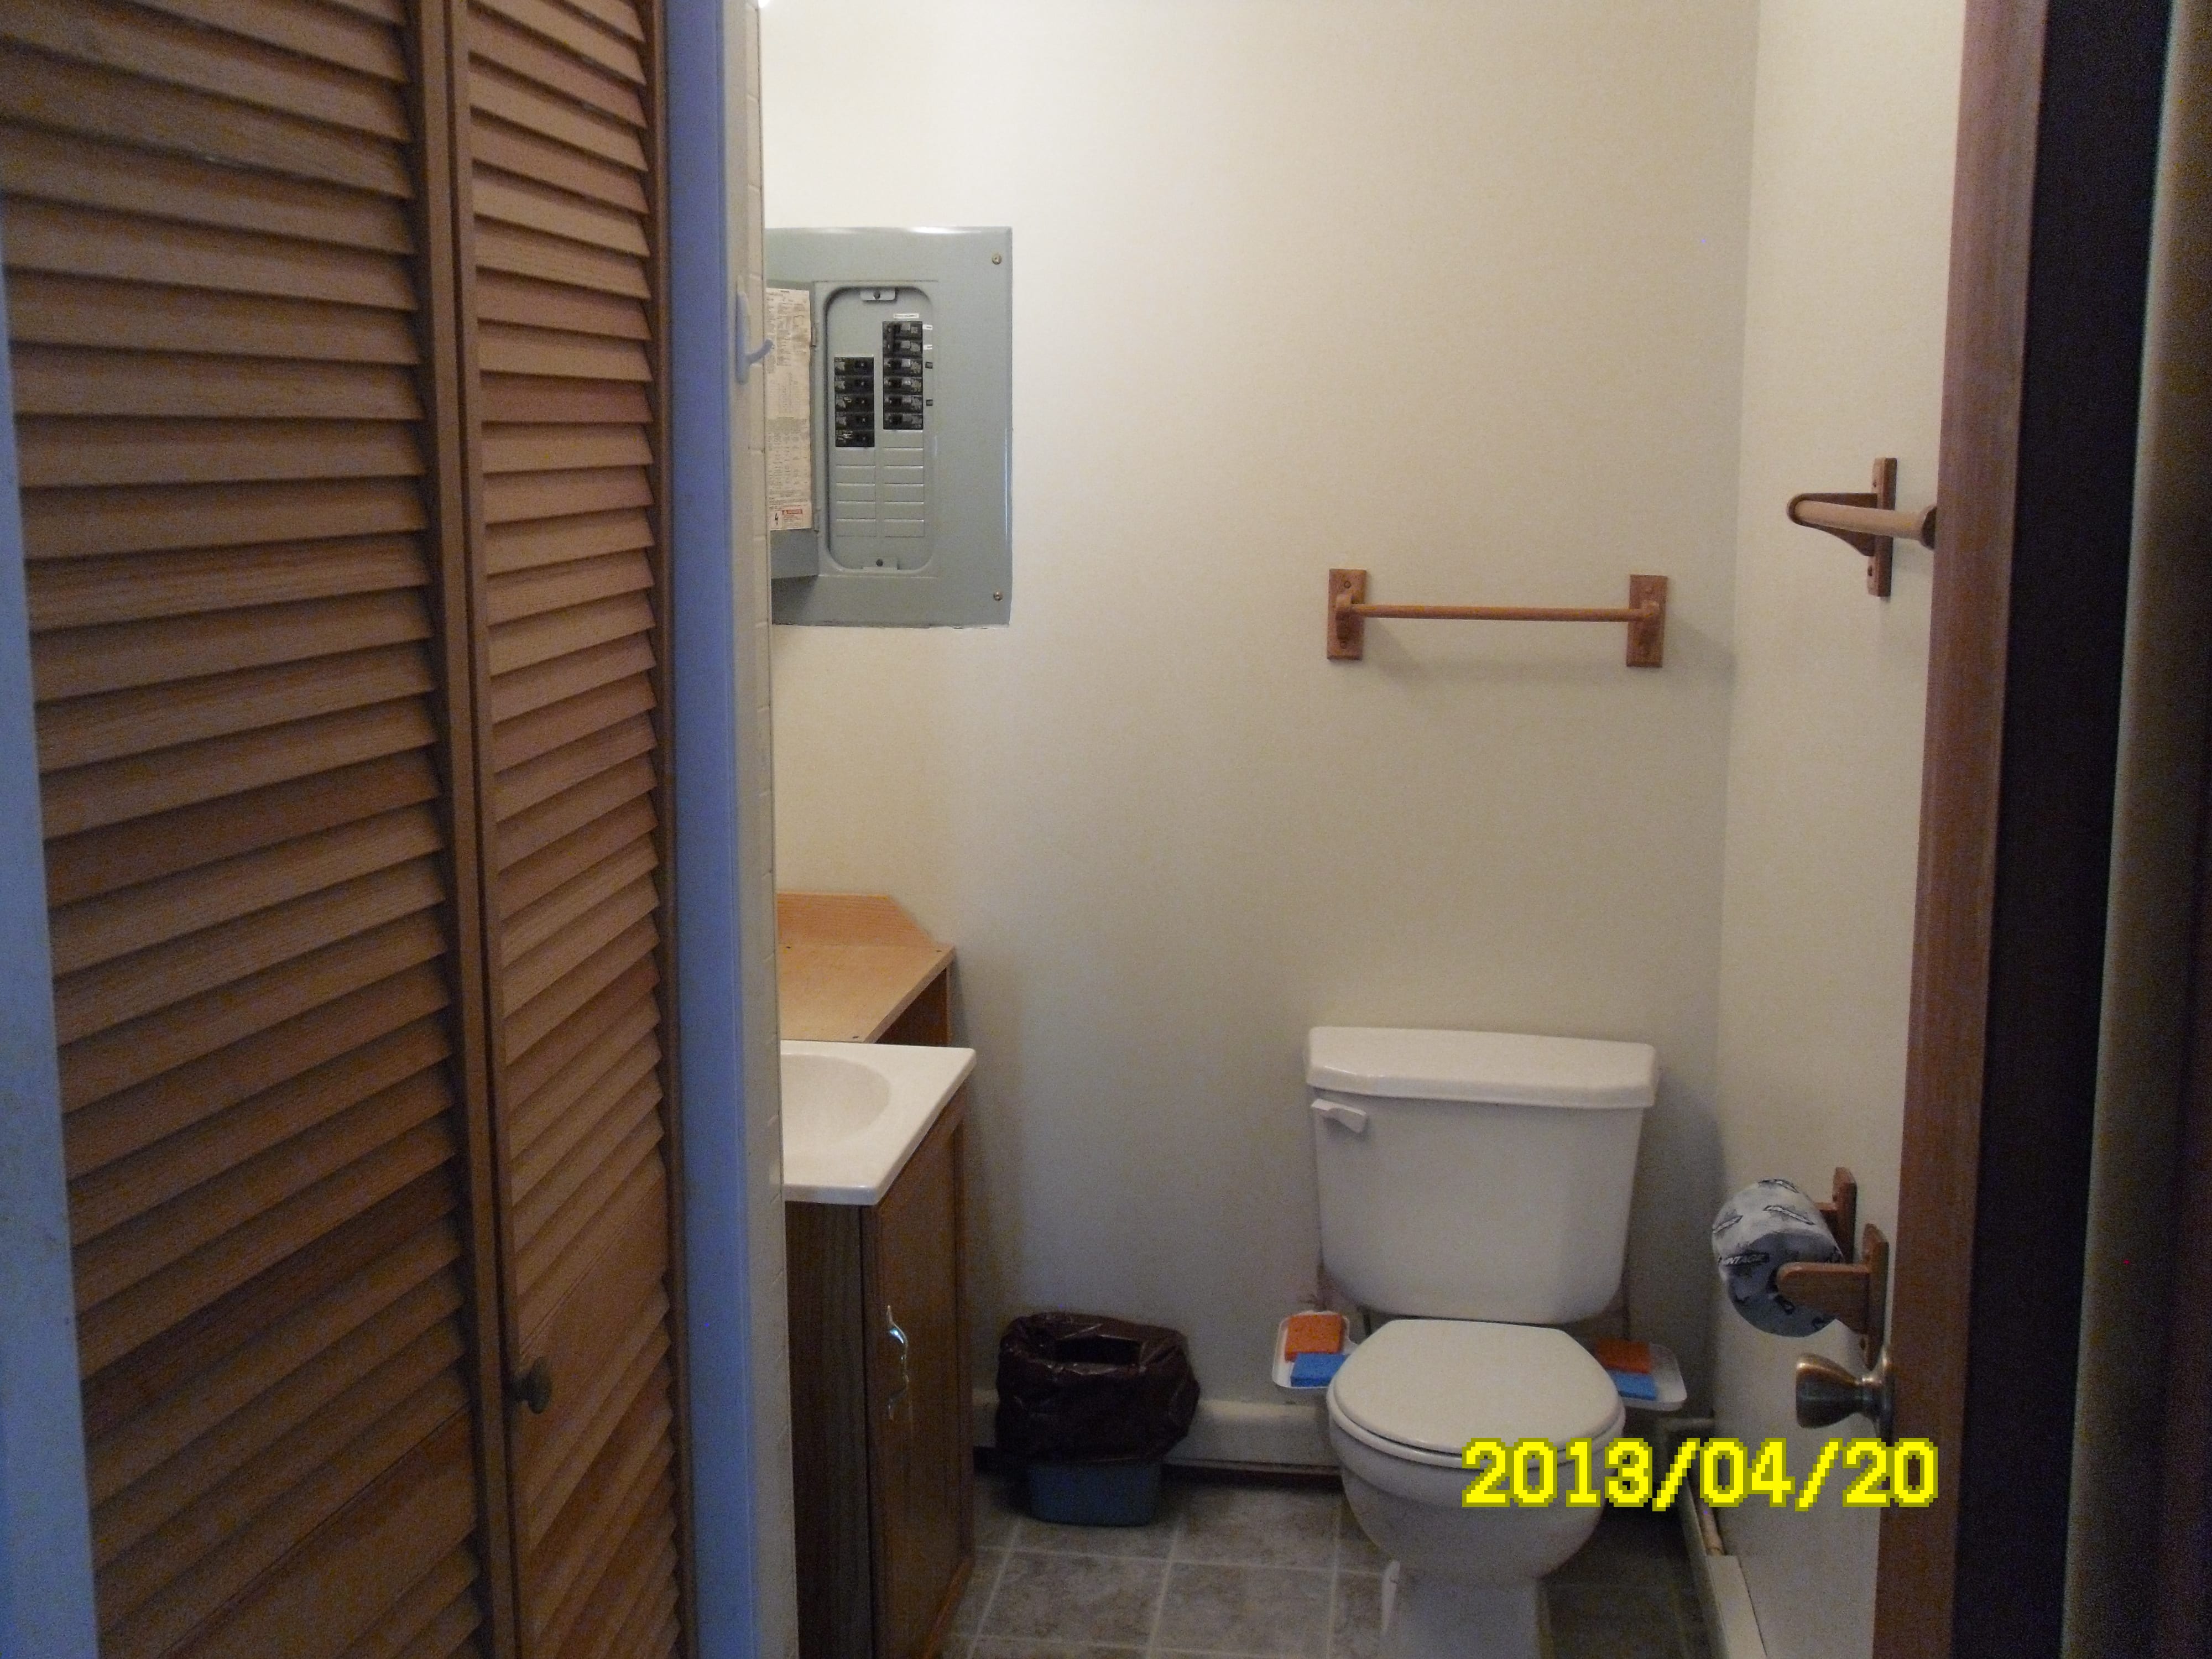 View of cabin 7 bathroom